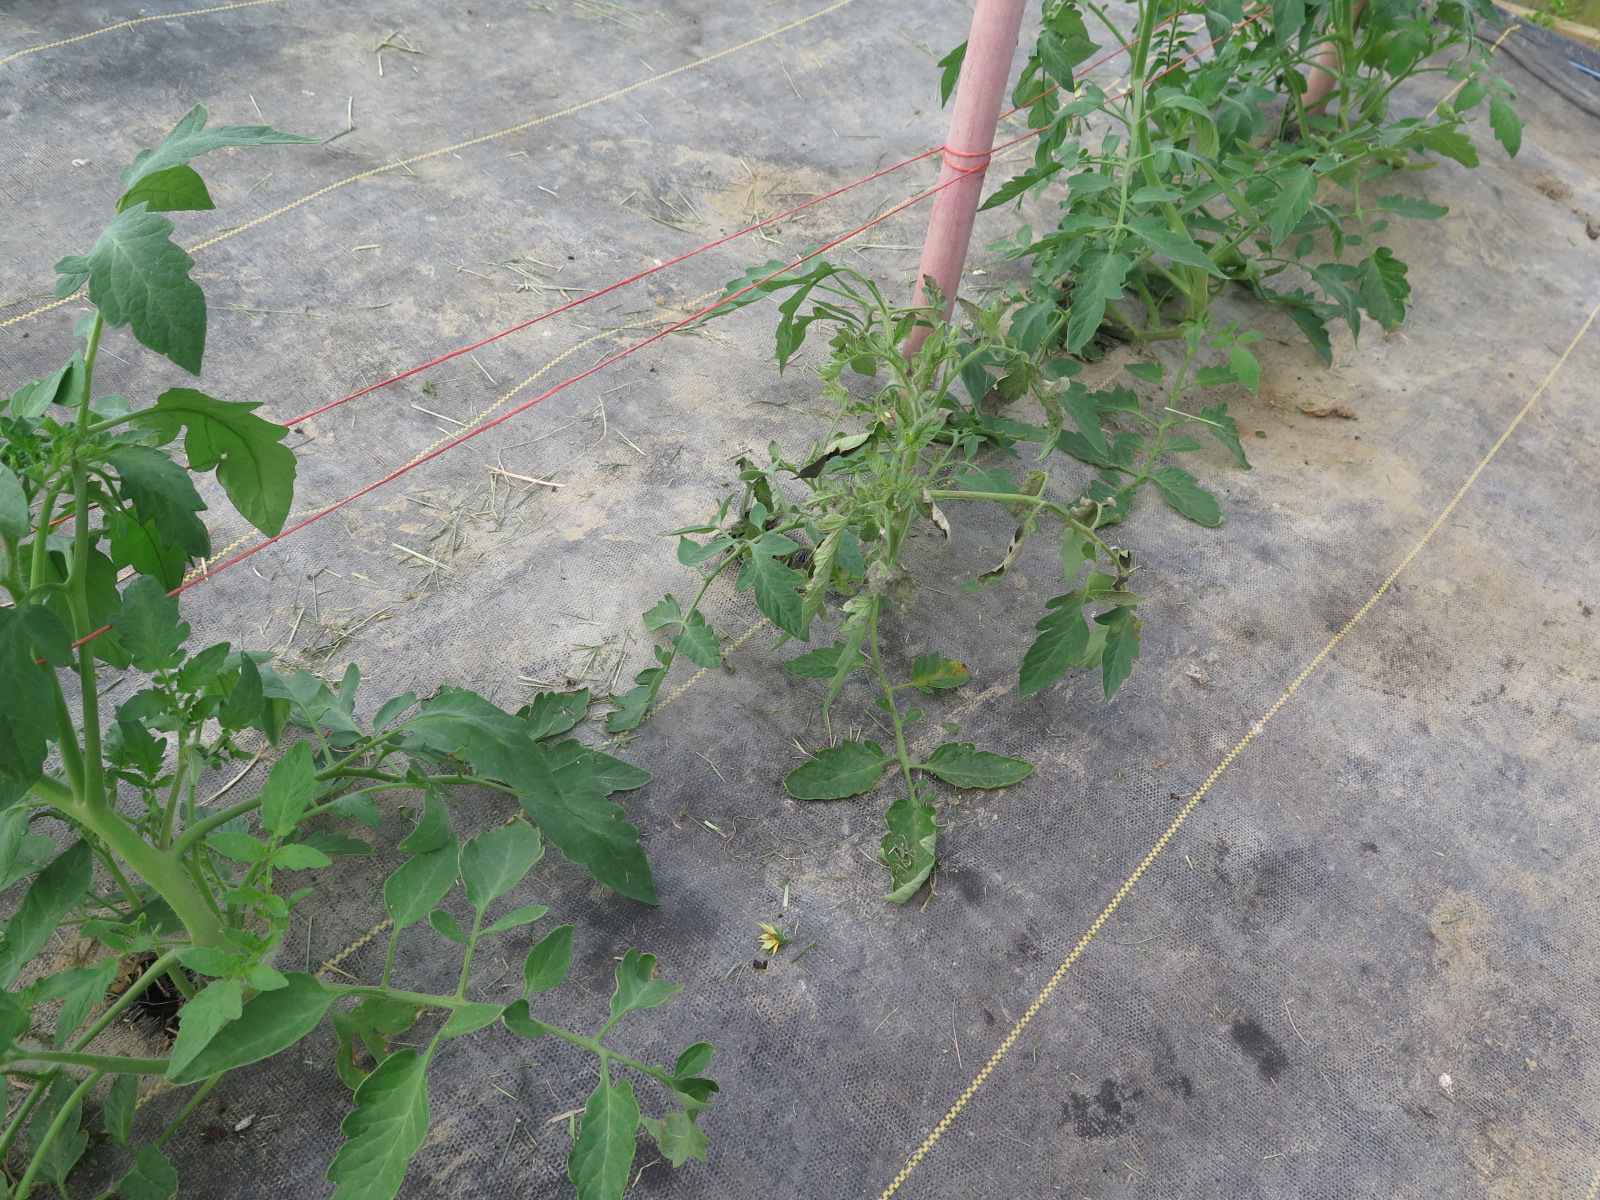 Figure 3. Tomato in center of photo is wilting due to tomato spotted wilt virus.